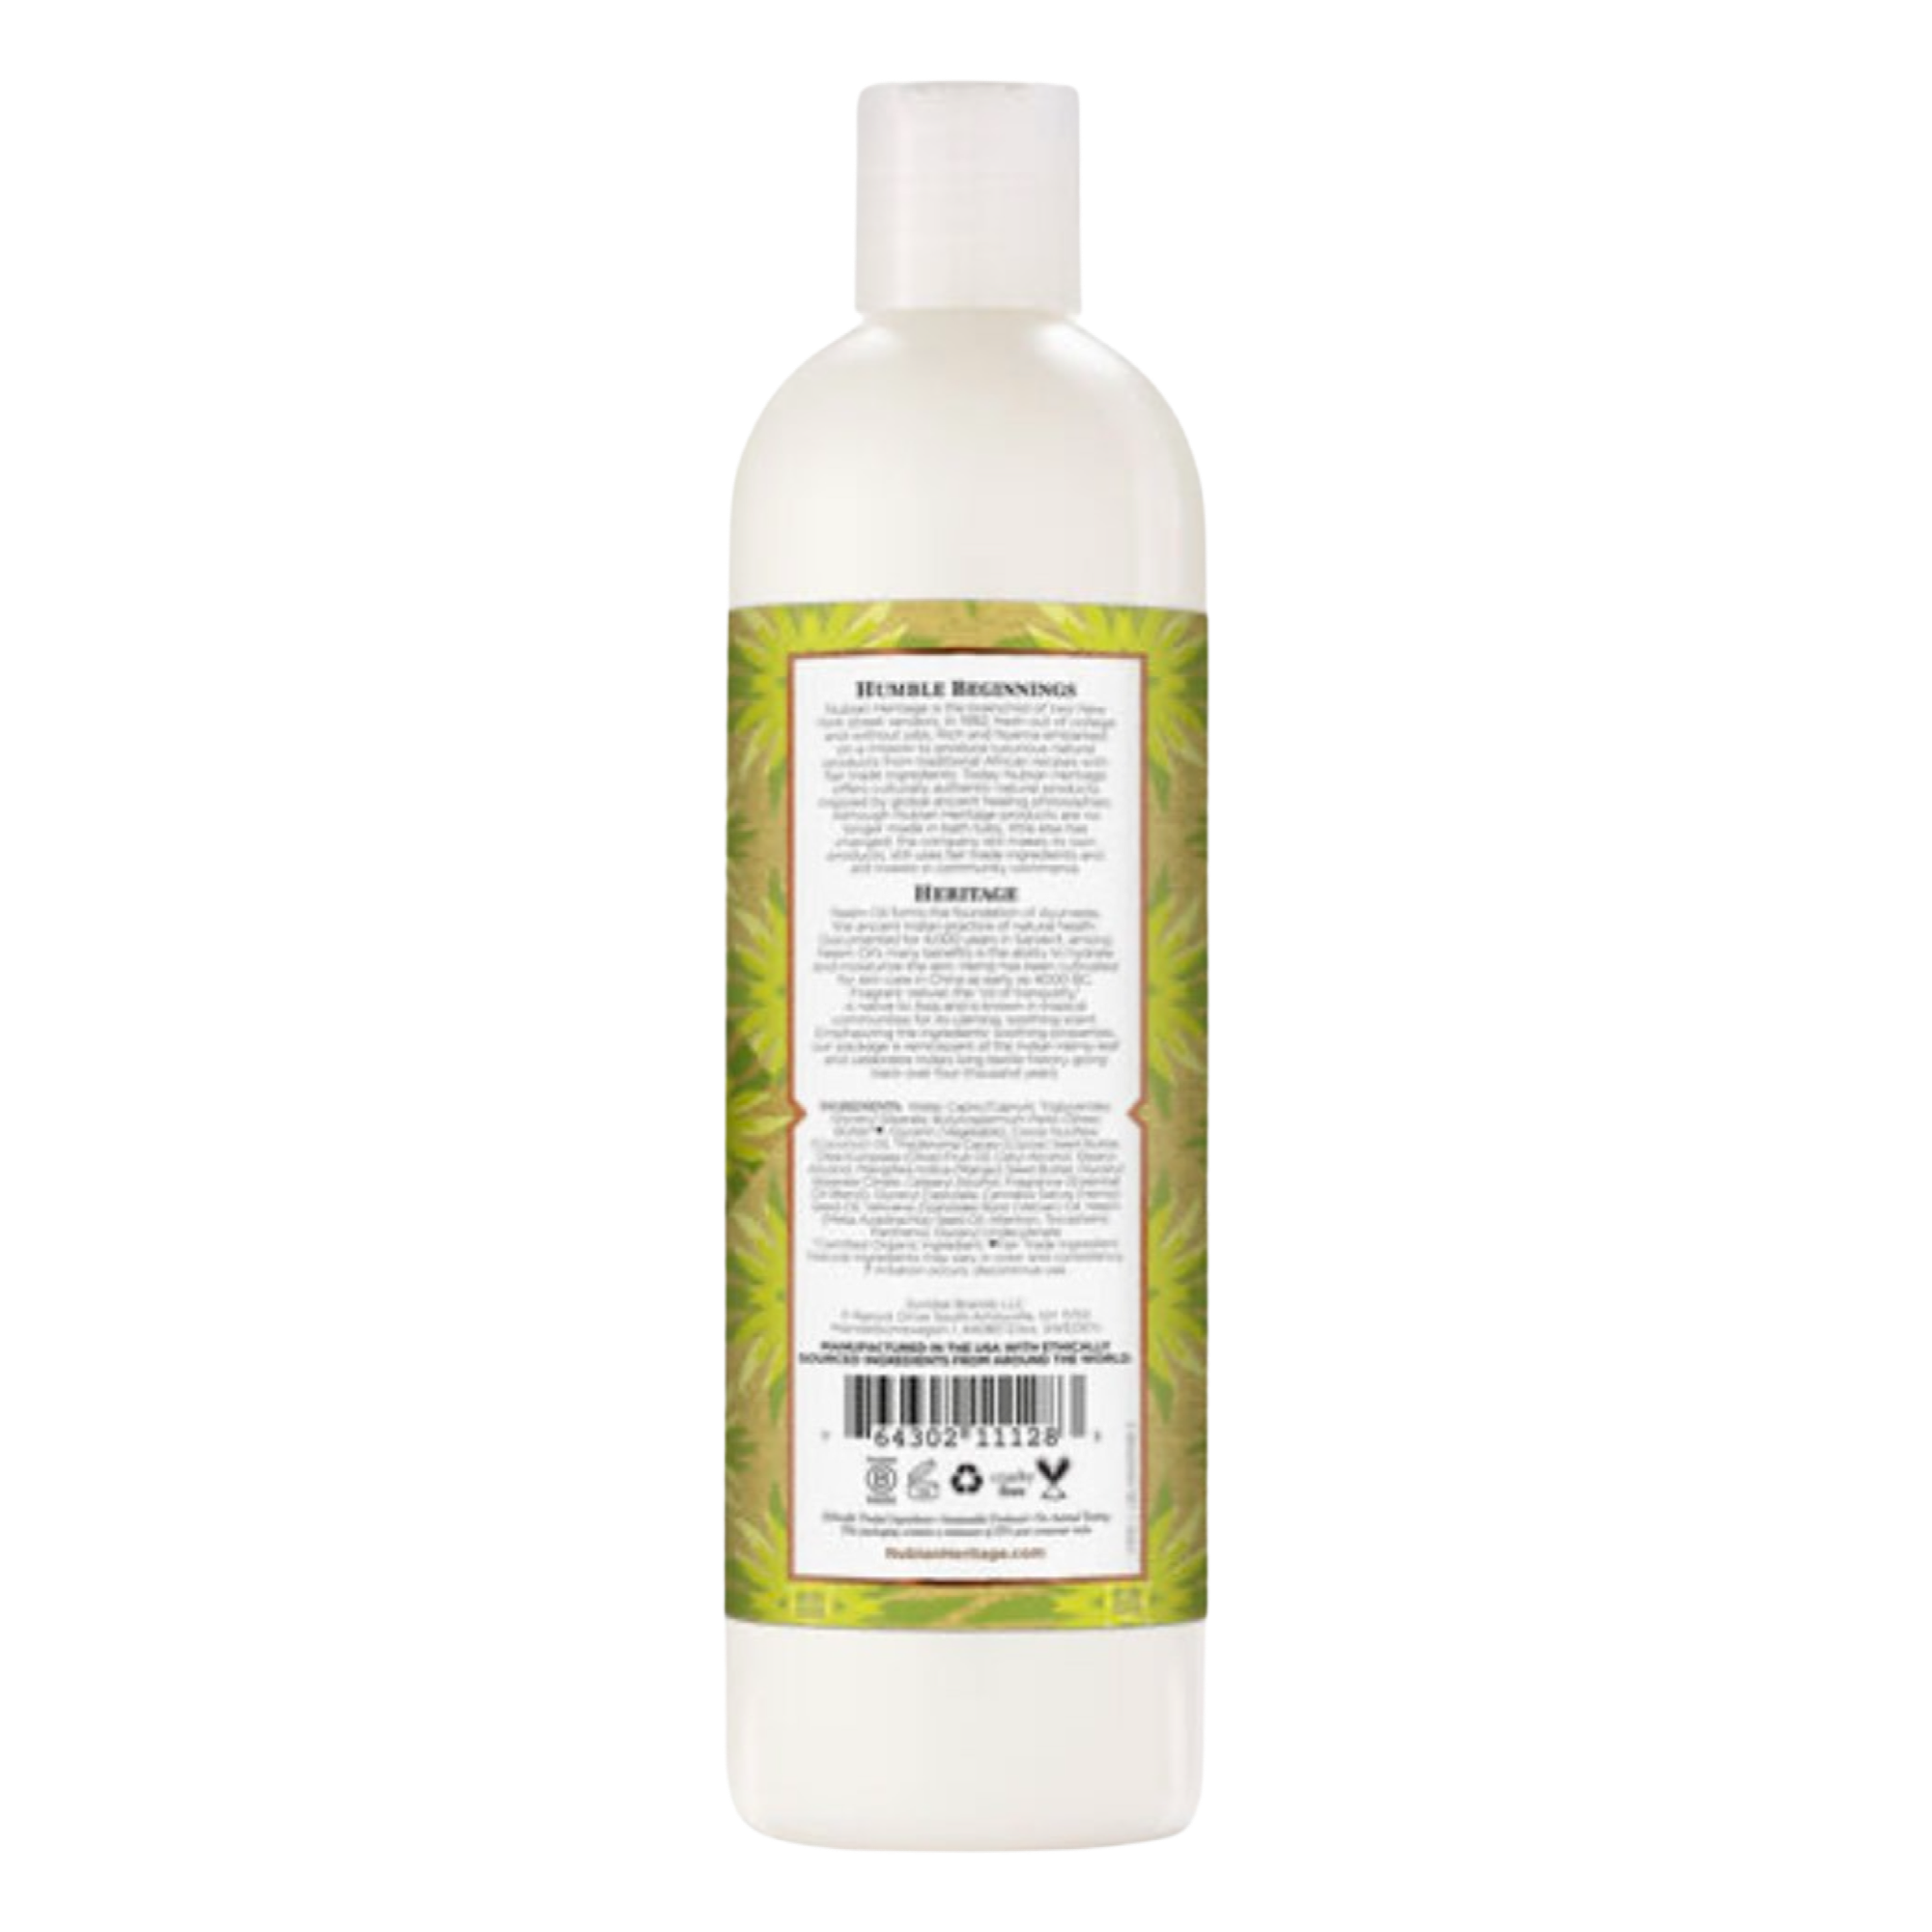 Indian & Haitian Vetiver Lotion.